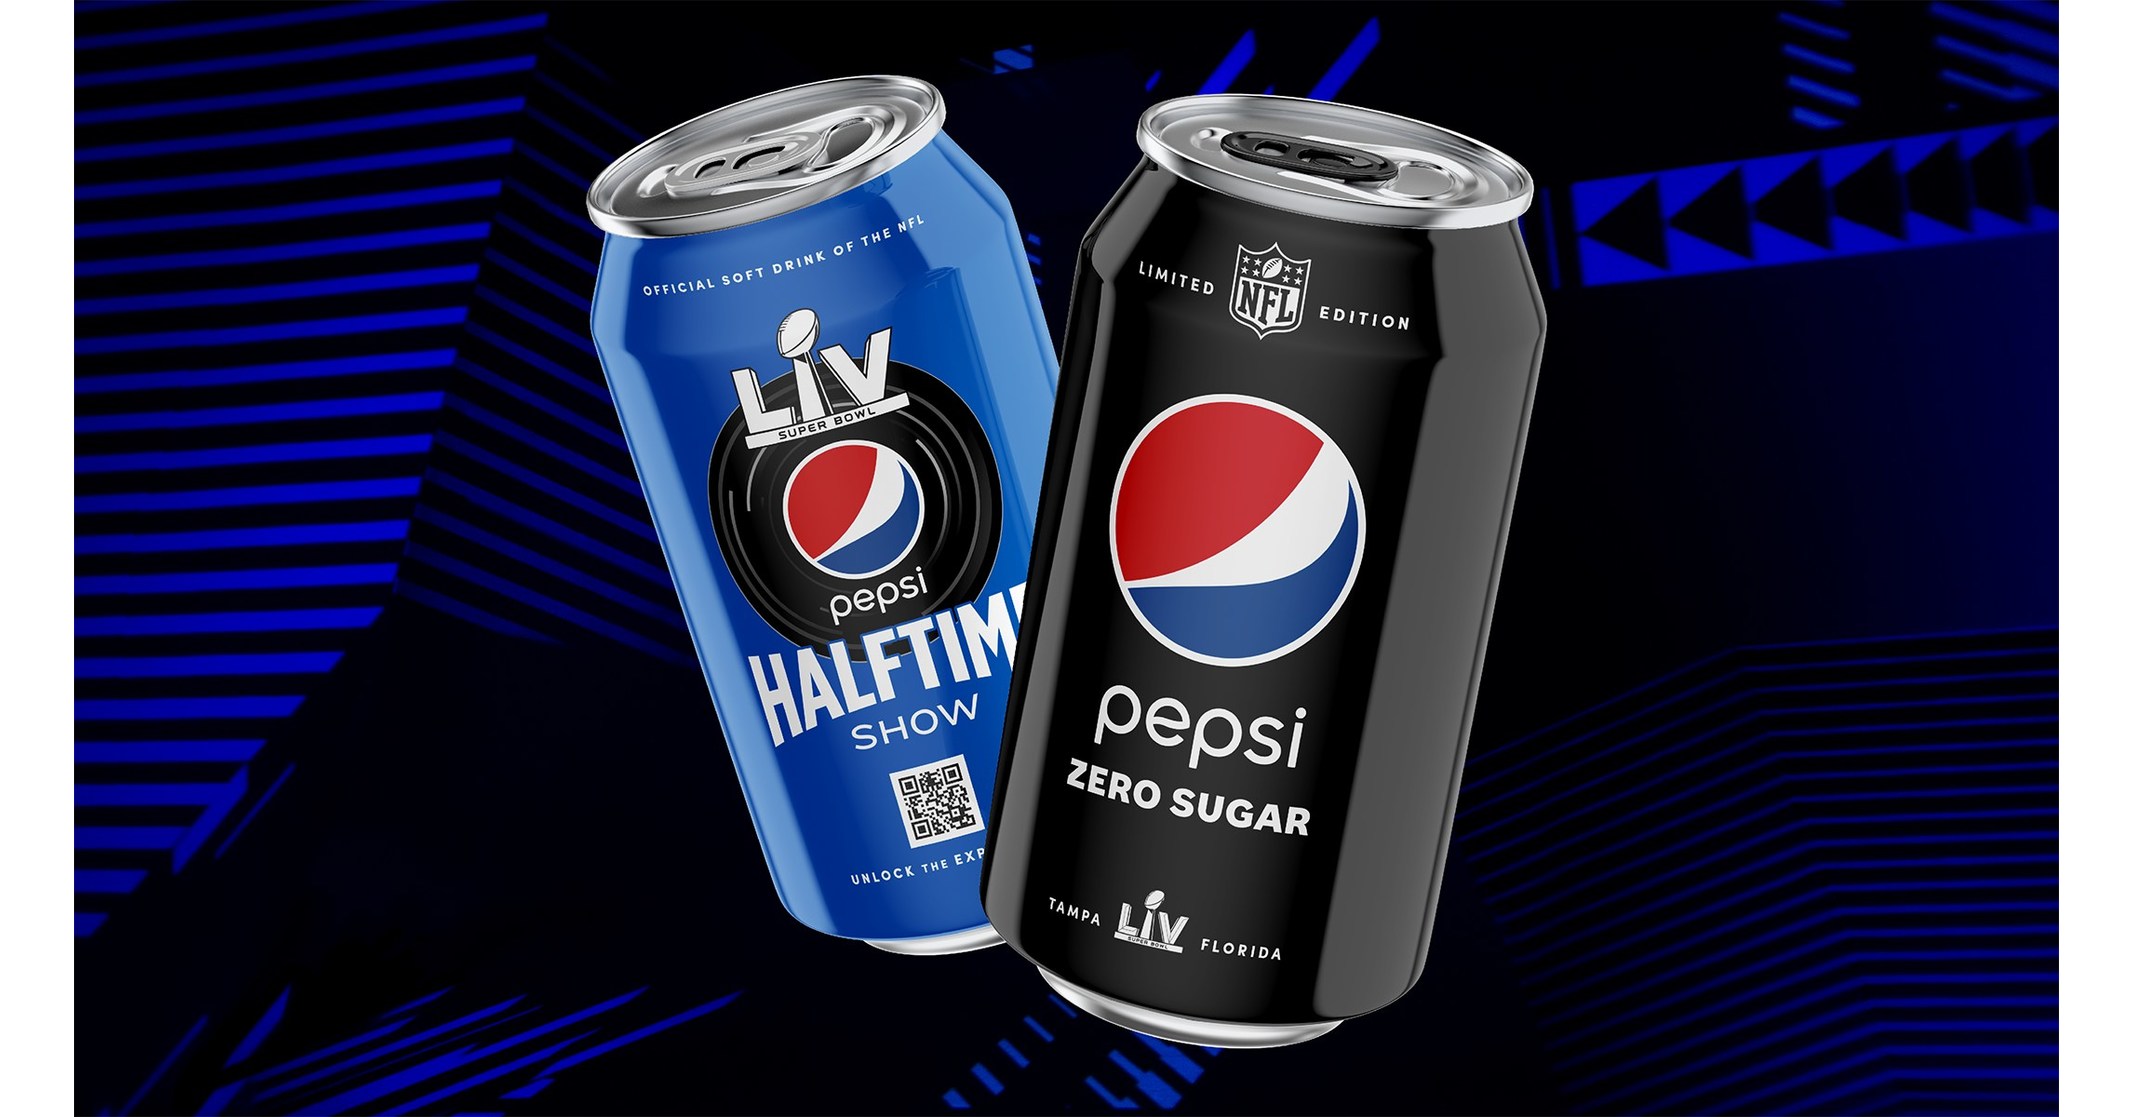 Pepsi Kicks Off Super Bowl LV Halftime Show Early with New TV Spot  Featuring The Weeknd and Launch of Digital Fan Portal